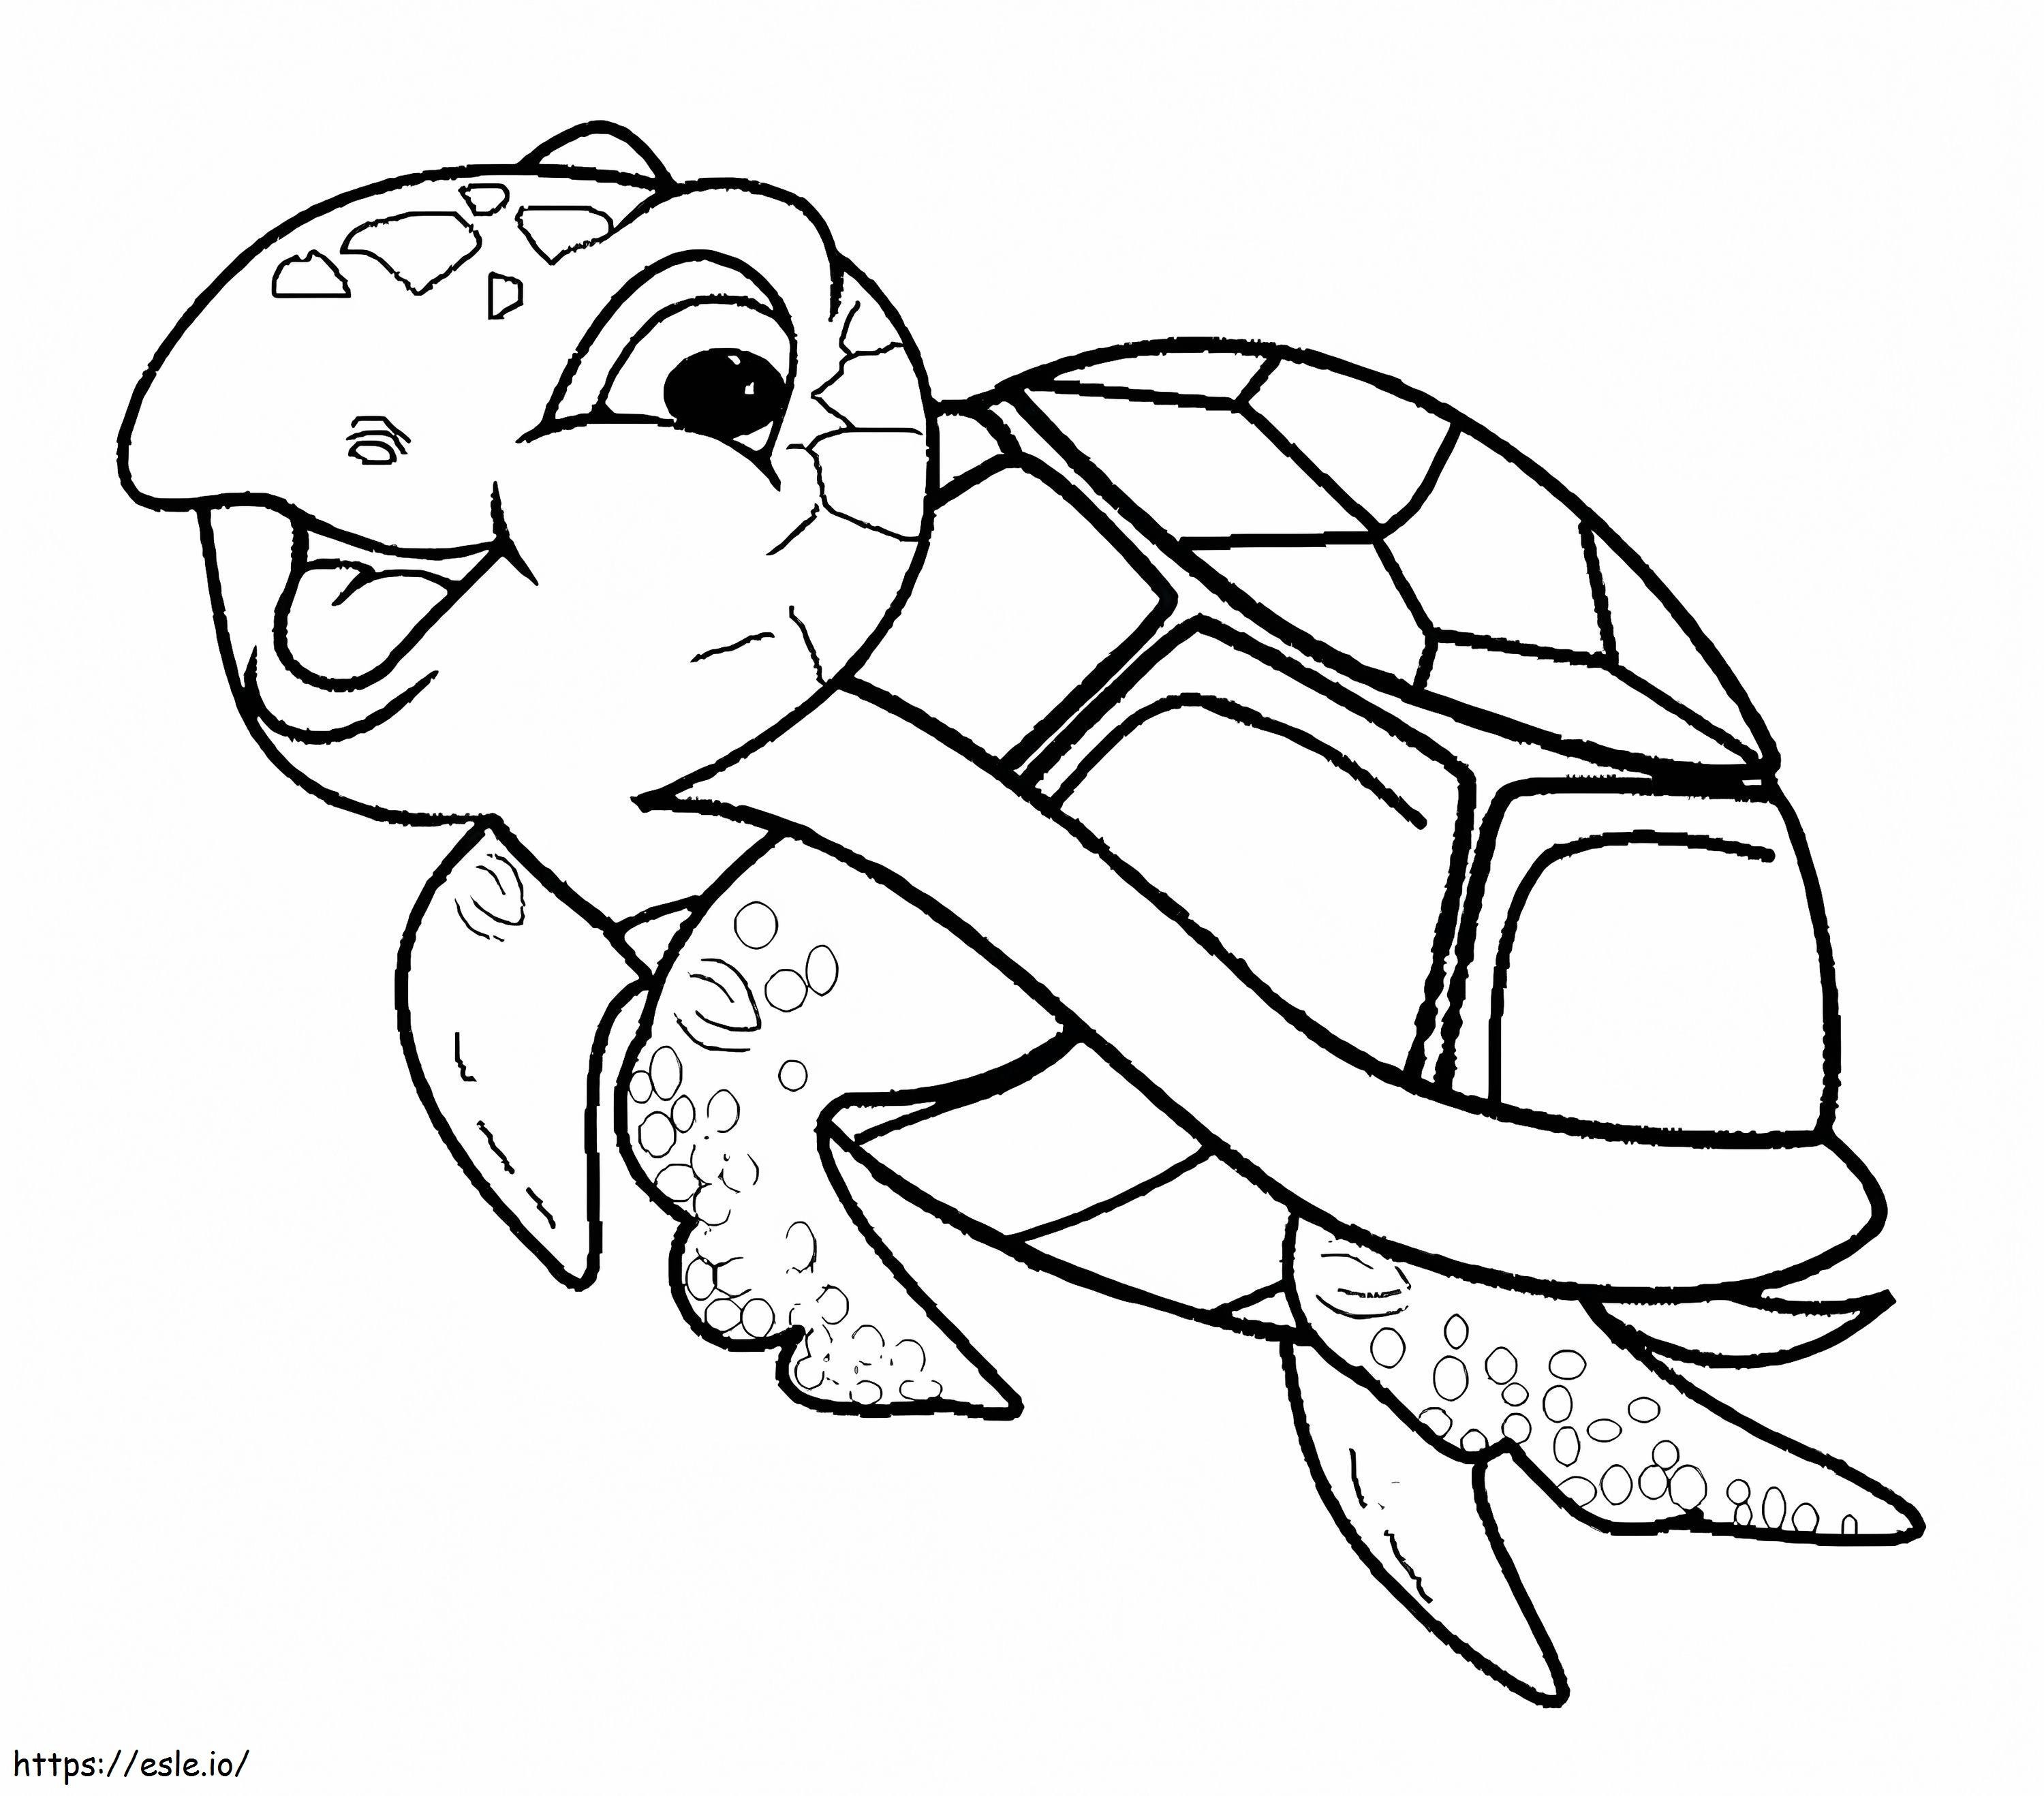 Holiday Color Pages Printable Ninja Turtle Color Pages Ninja Turtle Color Pages Printable Turtle Holiday Colouring Pages Sea Free Printable Christmas Color By Number Pages coloring page